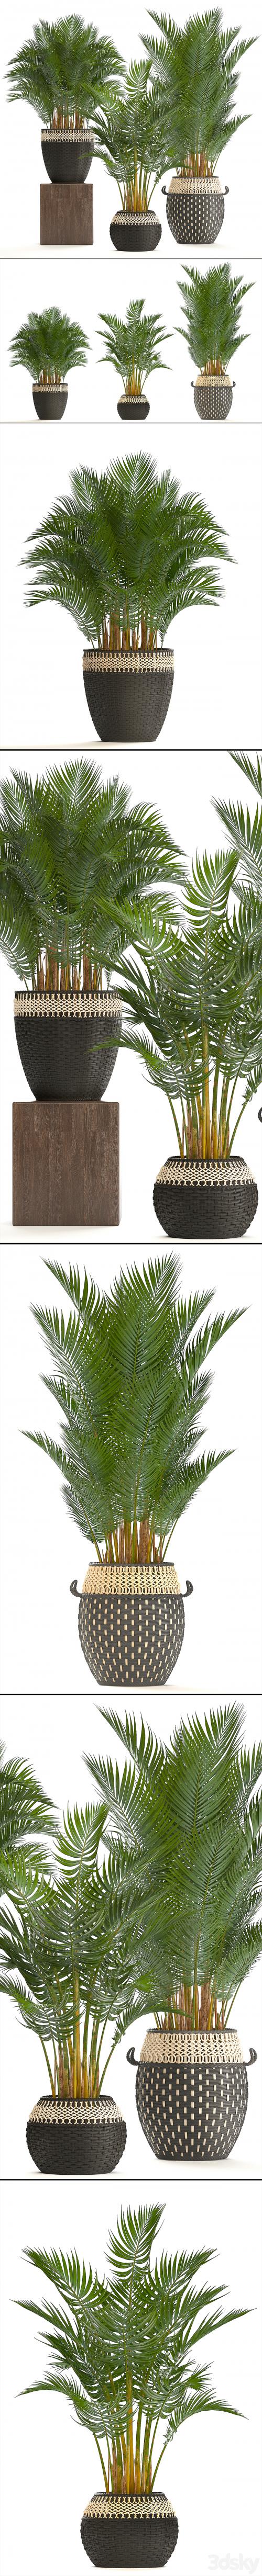 Collection of plants 218. Howea forsteriana, basket, rattan, palm tree, interior palm trees, eco style, design, natural decor, wicker